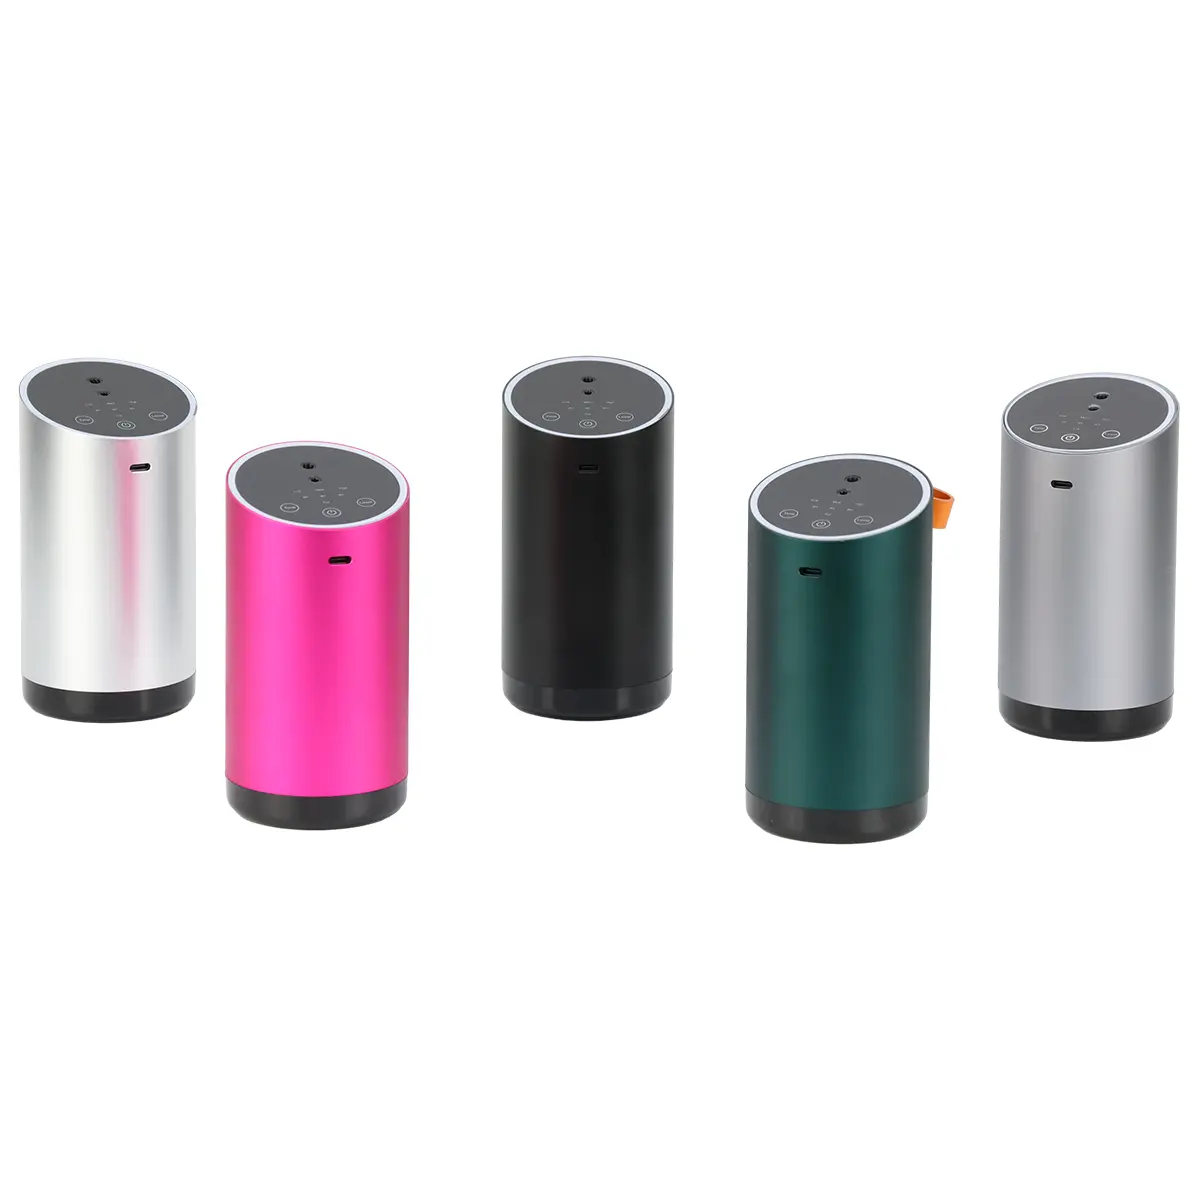 Battery Operated Aroma Diffuser Car Scent Spray Mini Air Freshener Spray for Car Diffuser Perfume Bottles with Scented Liquid